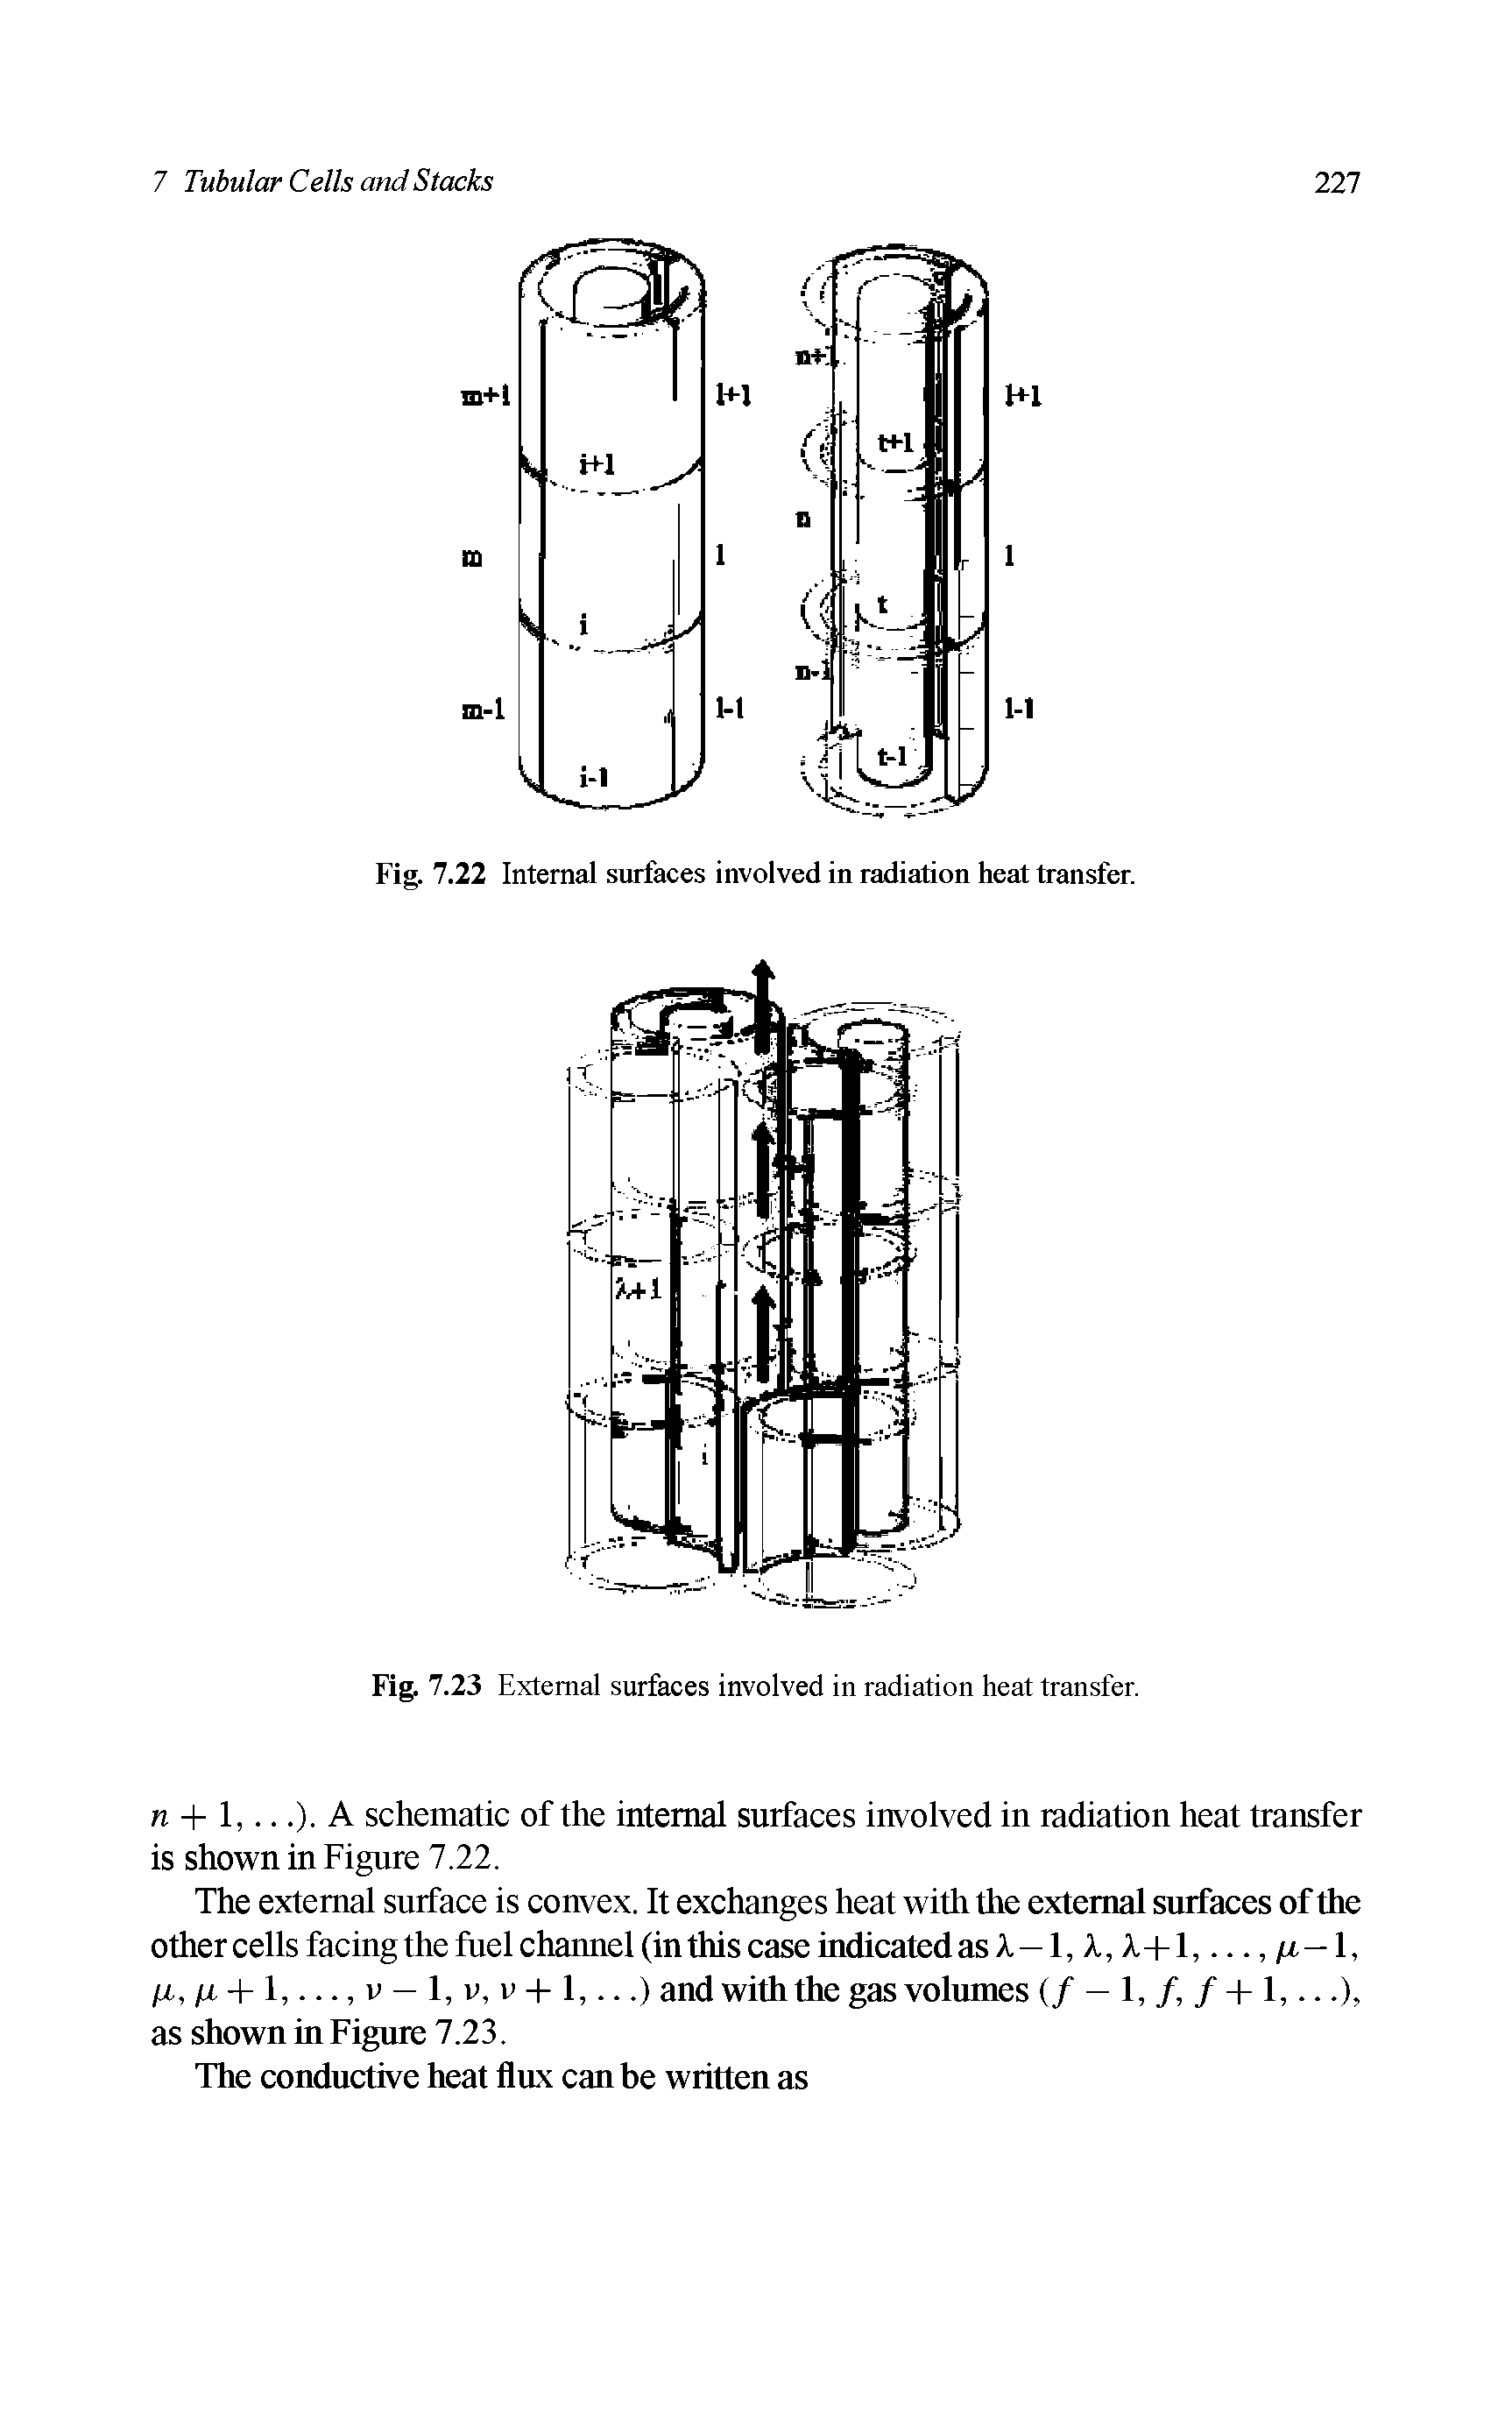 Fig. 7.22 Internal surfaces involved in radiation heat transfer.